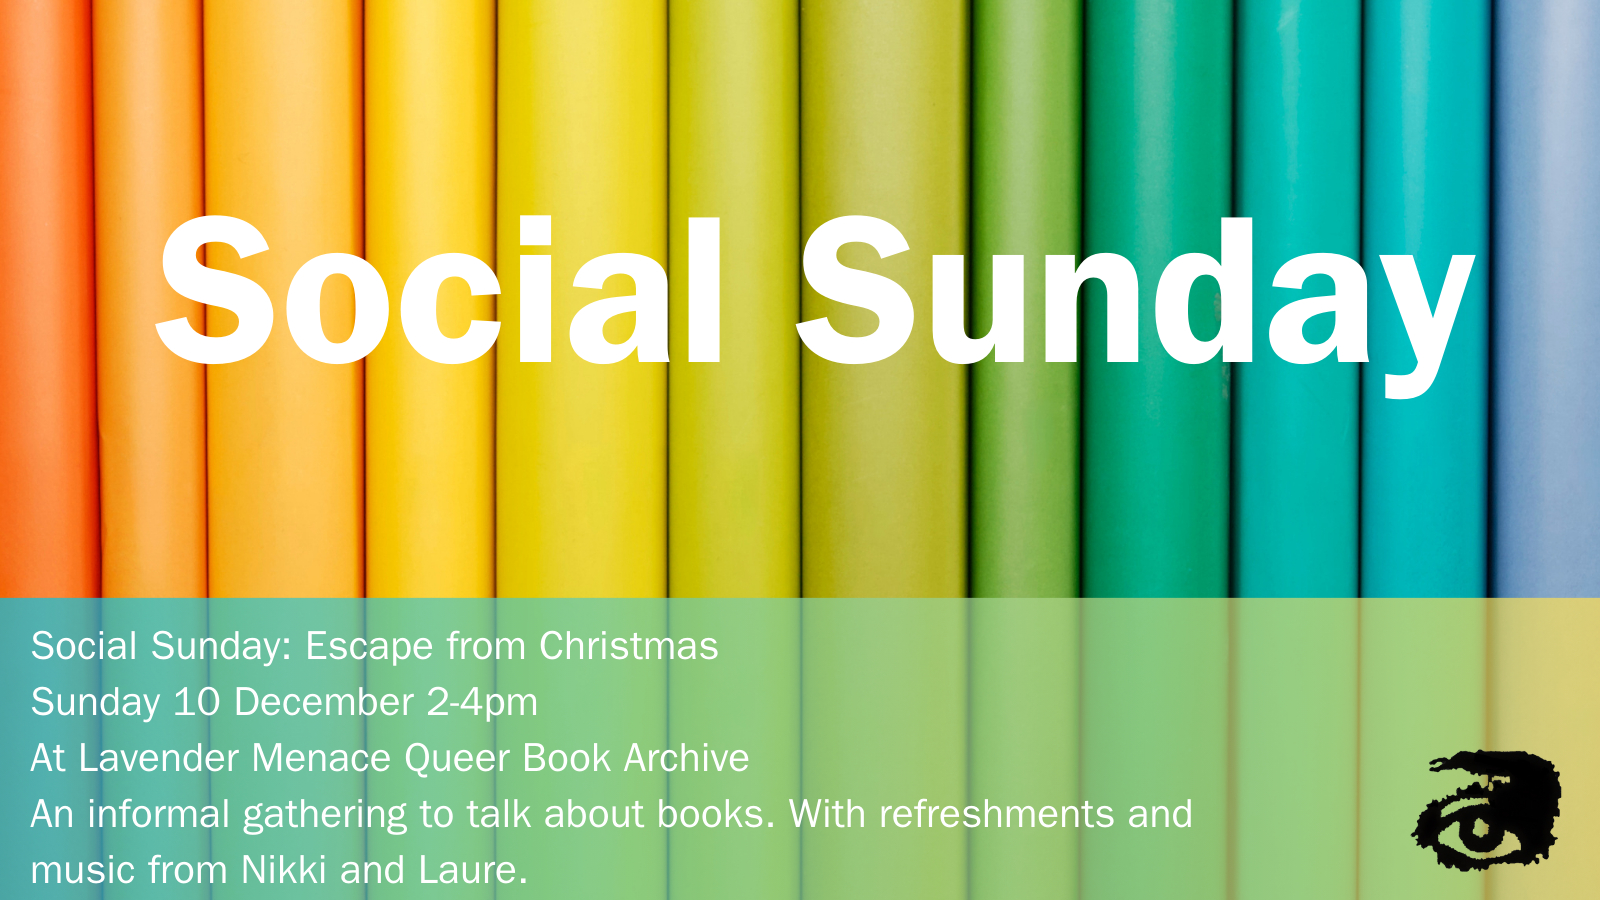 Decorative: Social Sunday against a background of book spines in different colours)